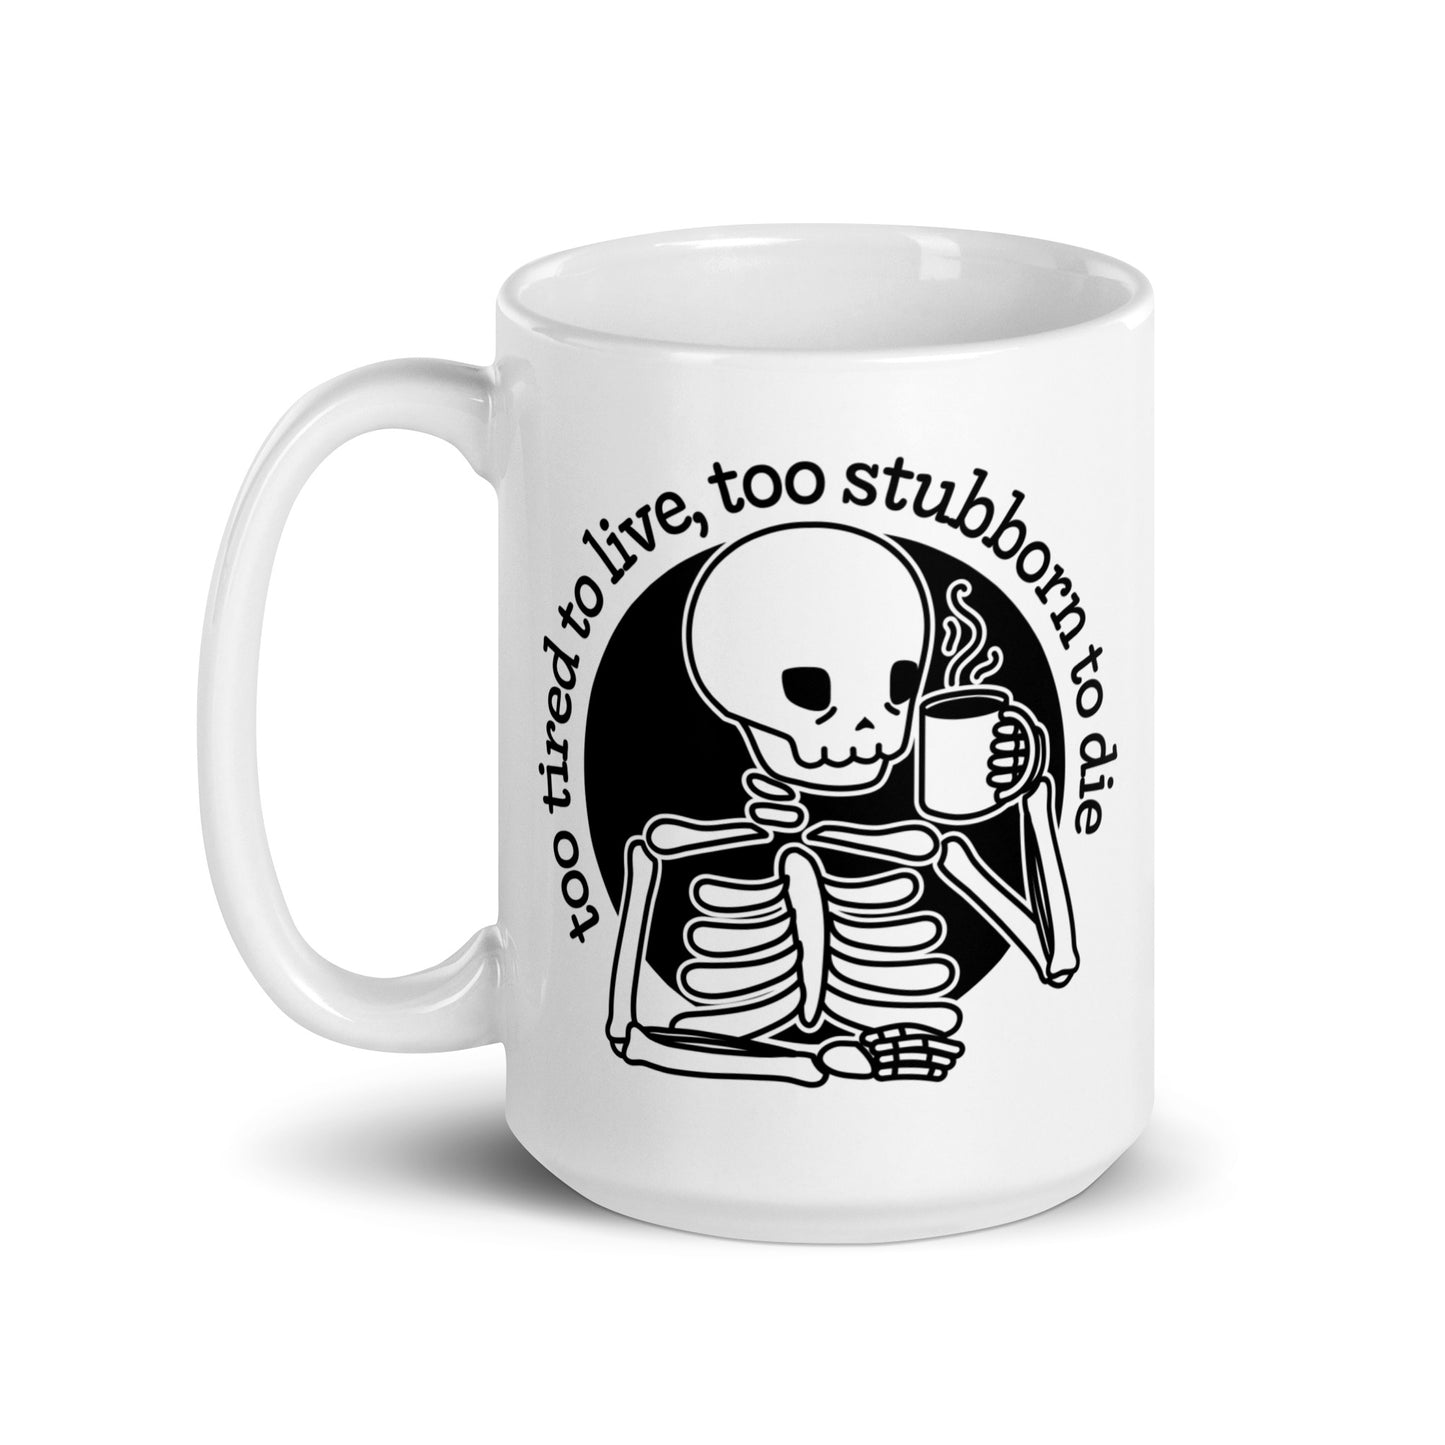 A white 15 ounce ceramic mug featuring a tired-looking skeleton holding a steaming mug. Text above the skeleton reads "too tired to live, too stubborn to die".